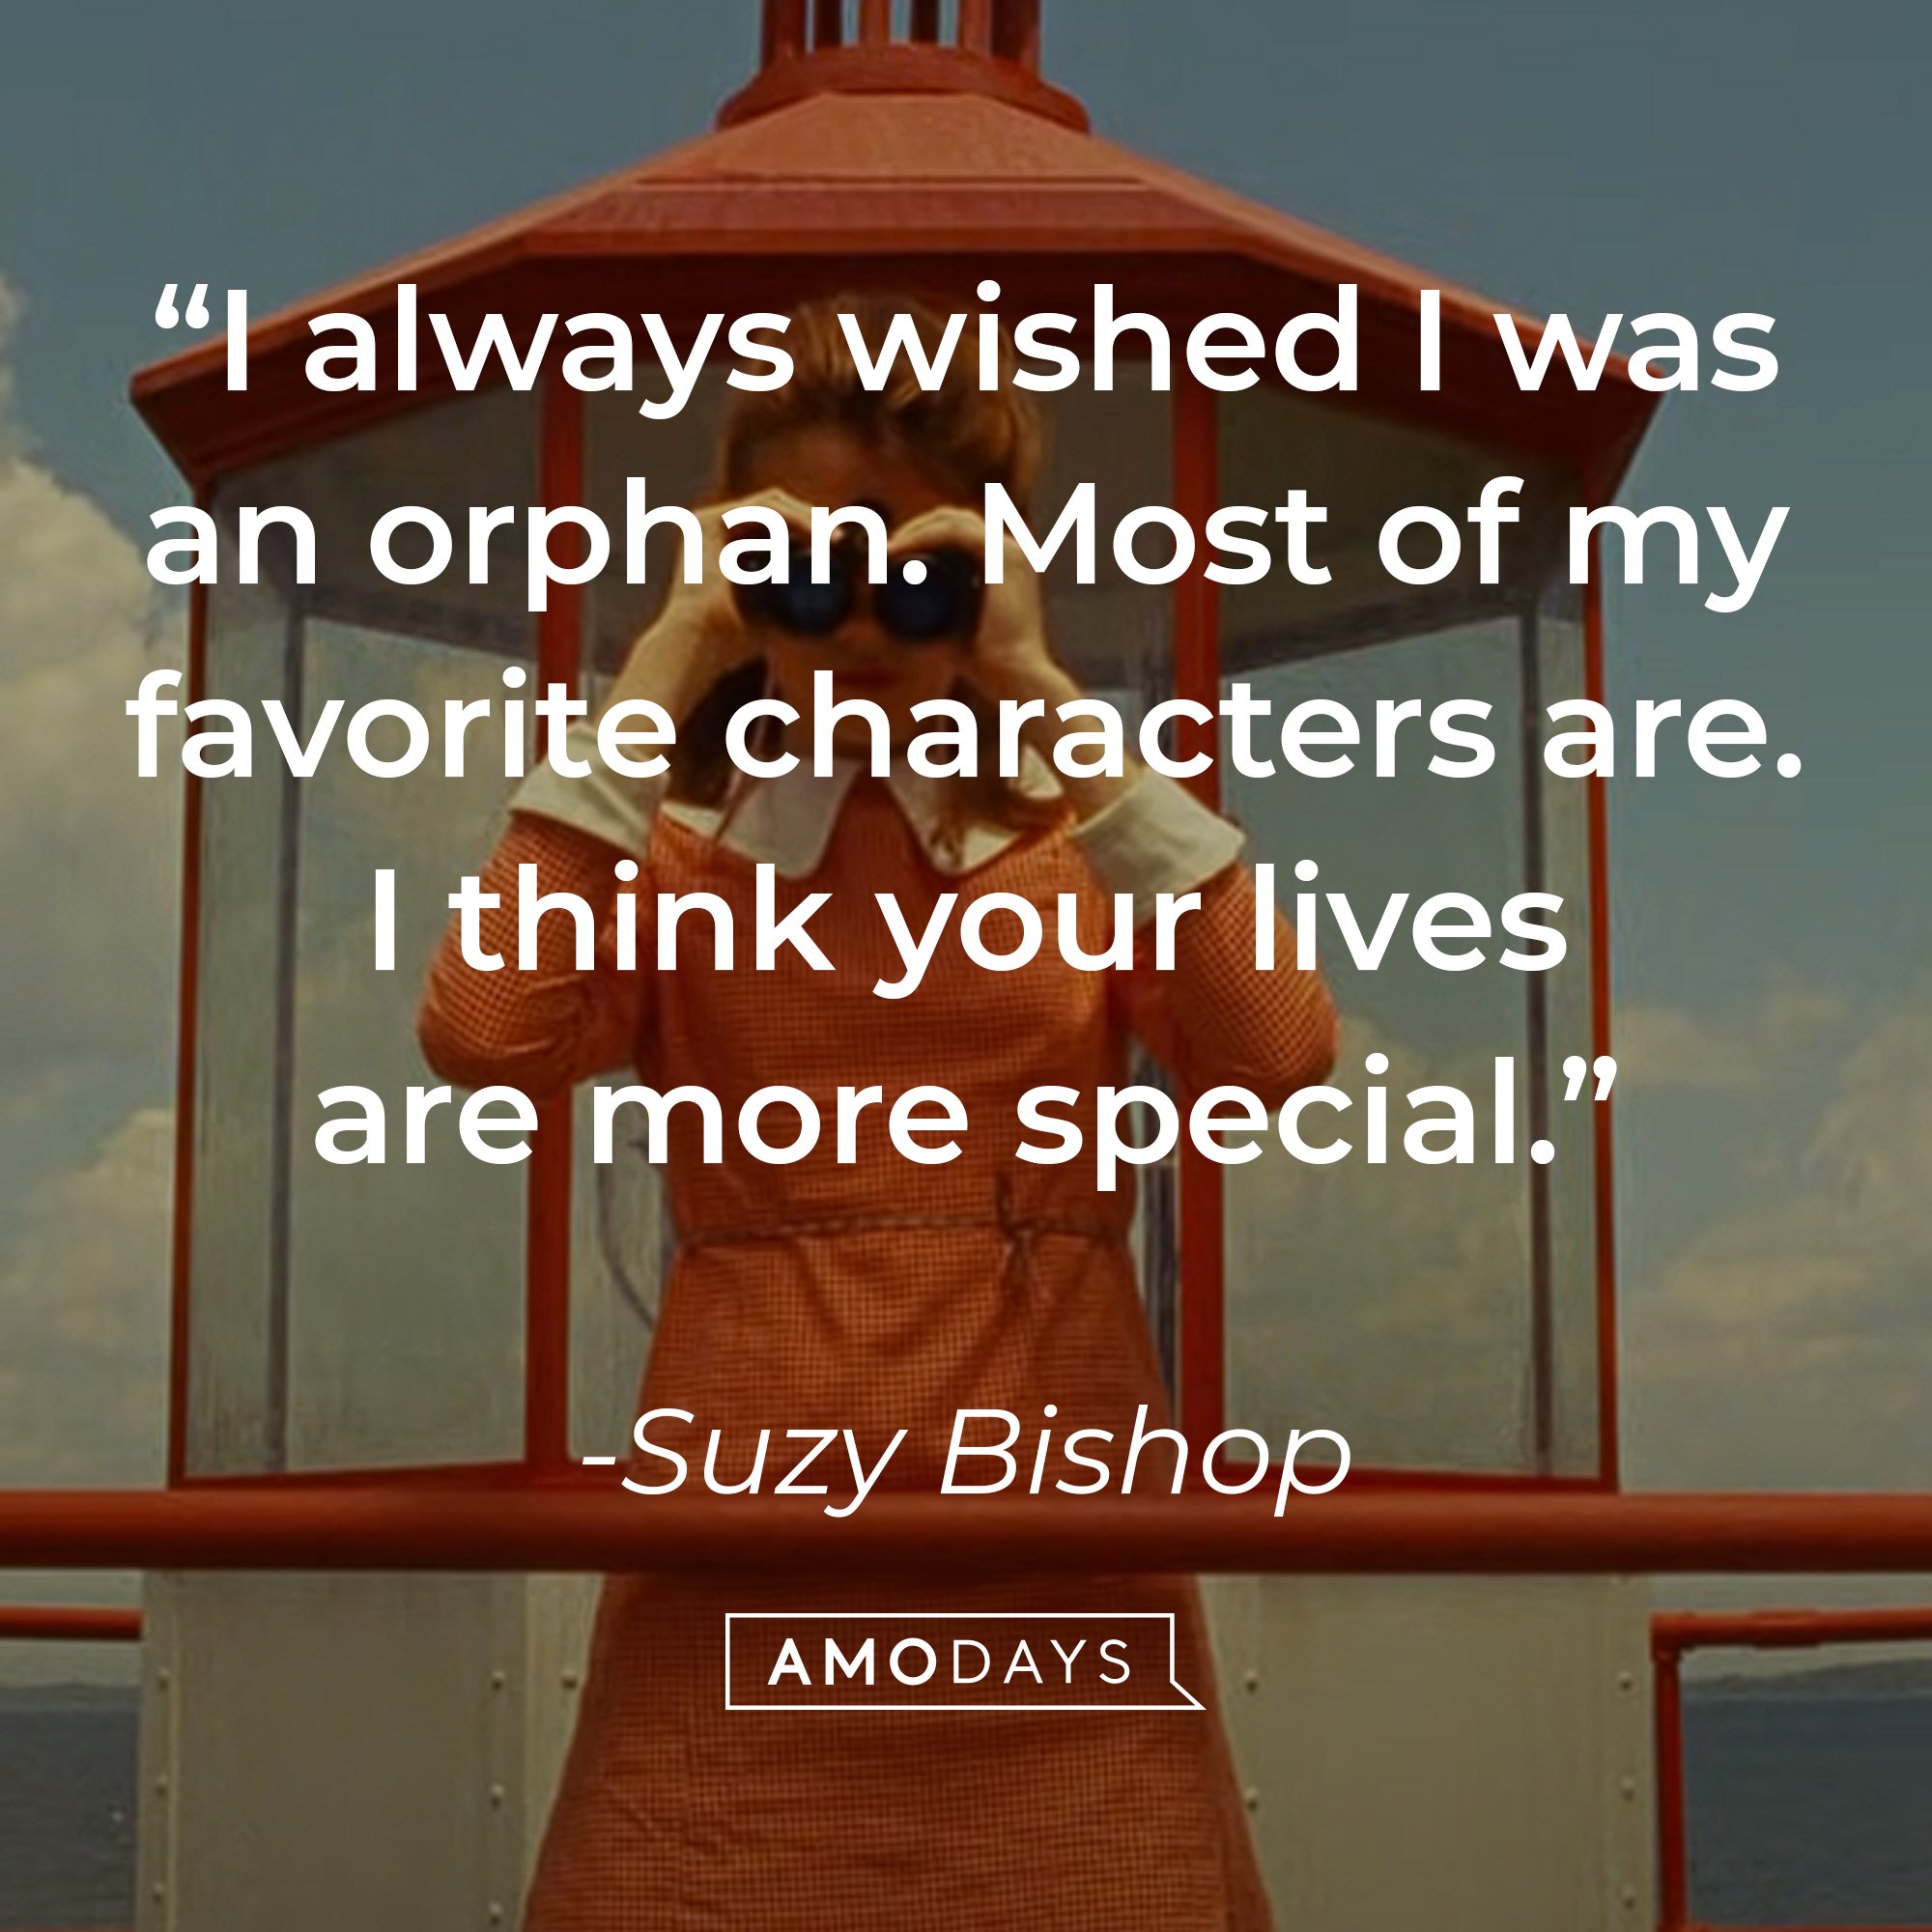 Suzy Bishop's quote: "I always wished I was an orphan. Most of my favorite characters are. I think your lives are more special." | Image: AmoDays